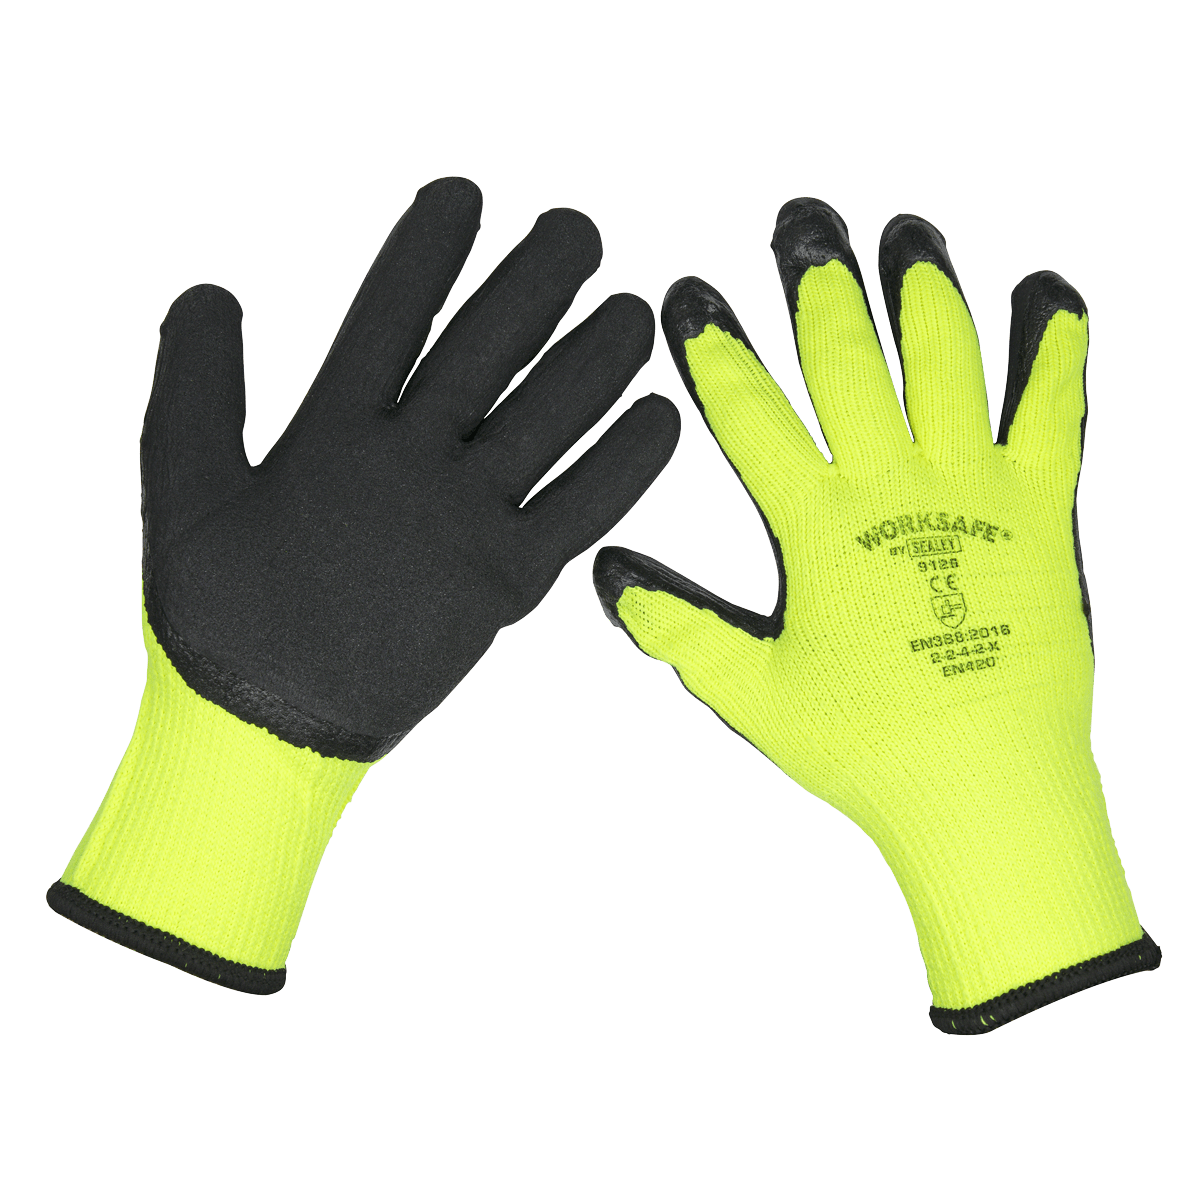 Sealey Thermal Super Grip Gloves (Large) - Pack of 6 Pairs